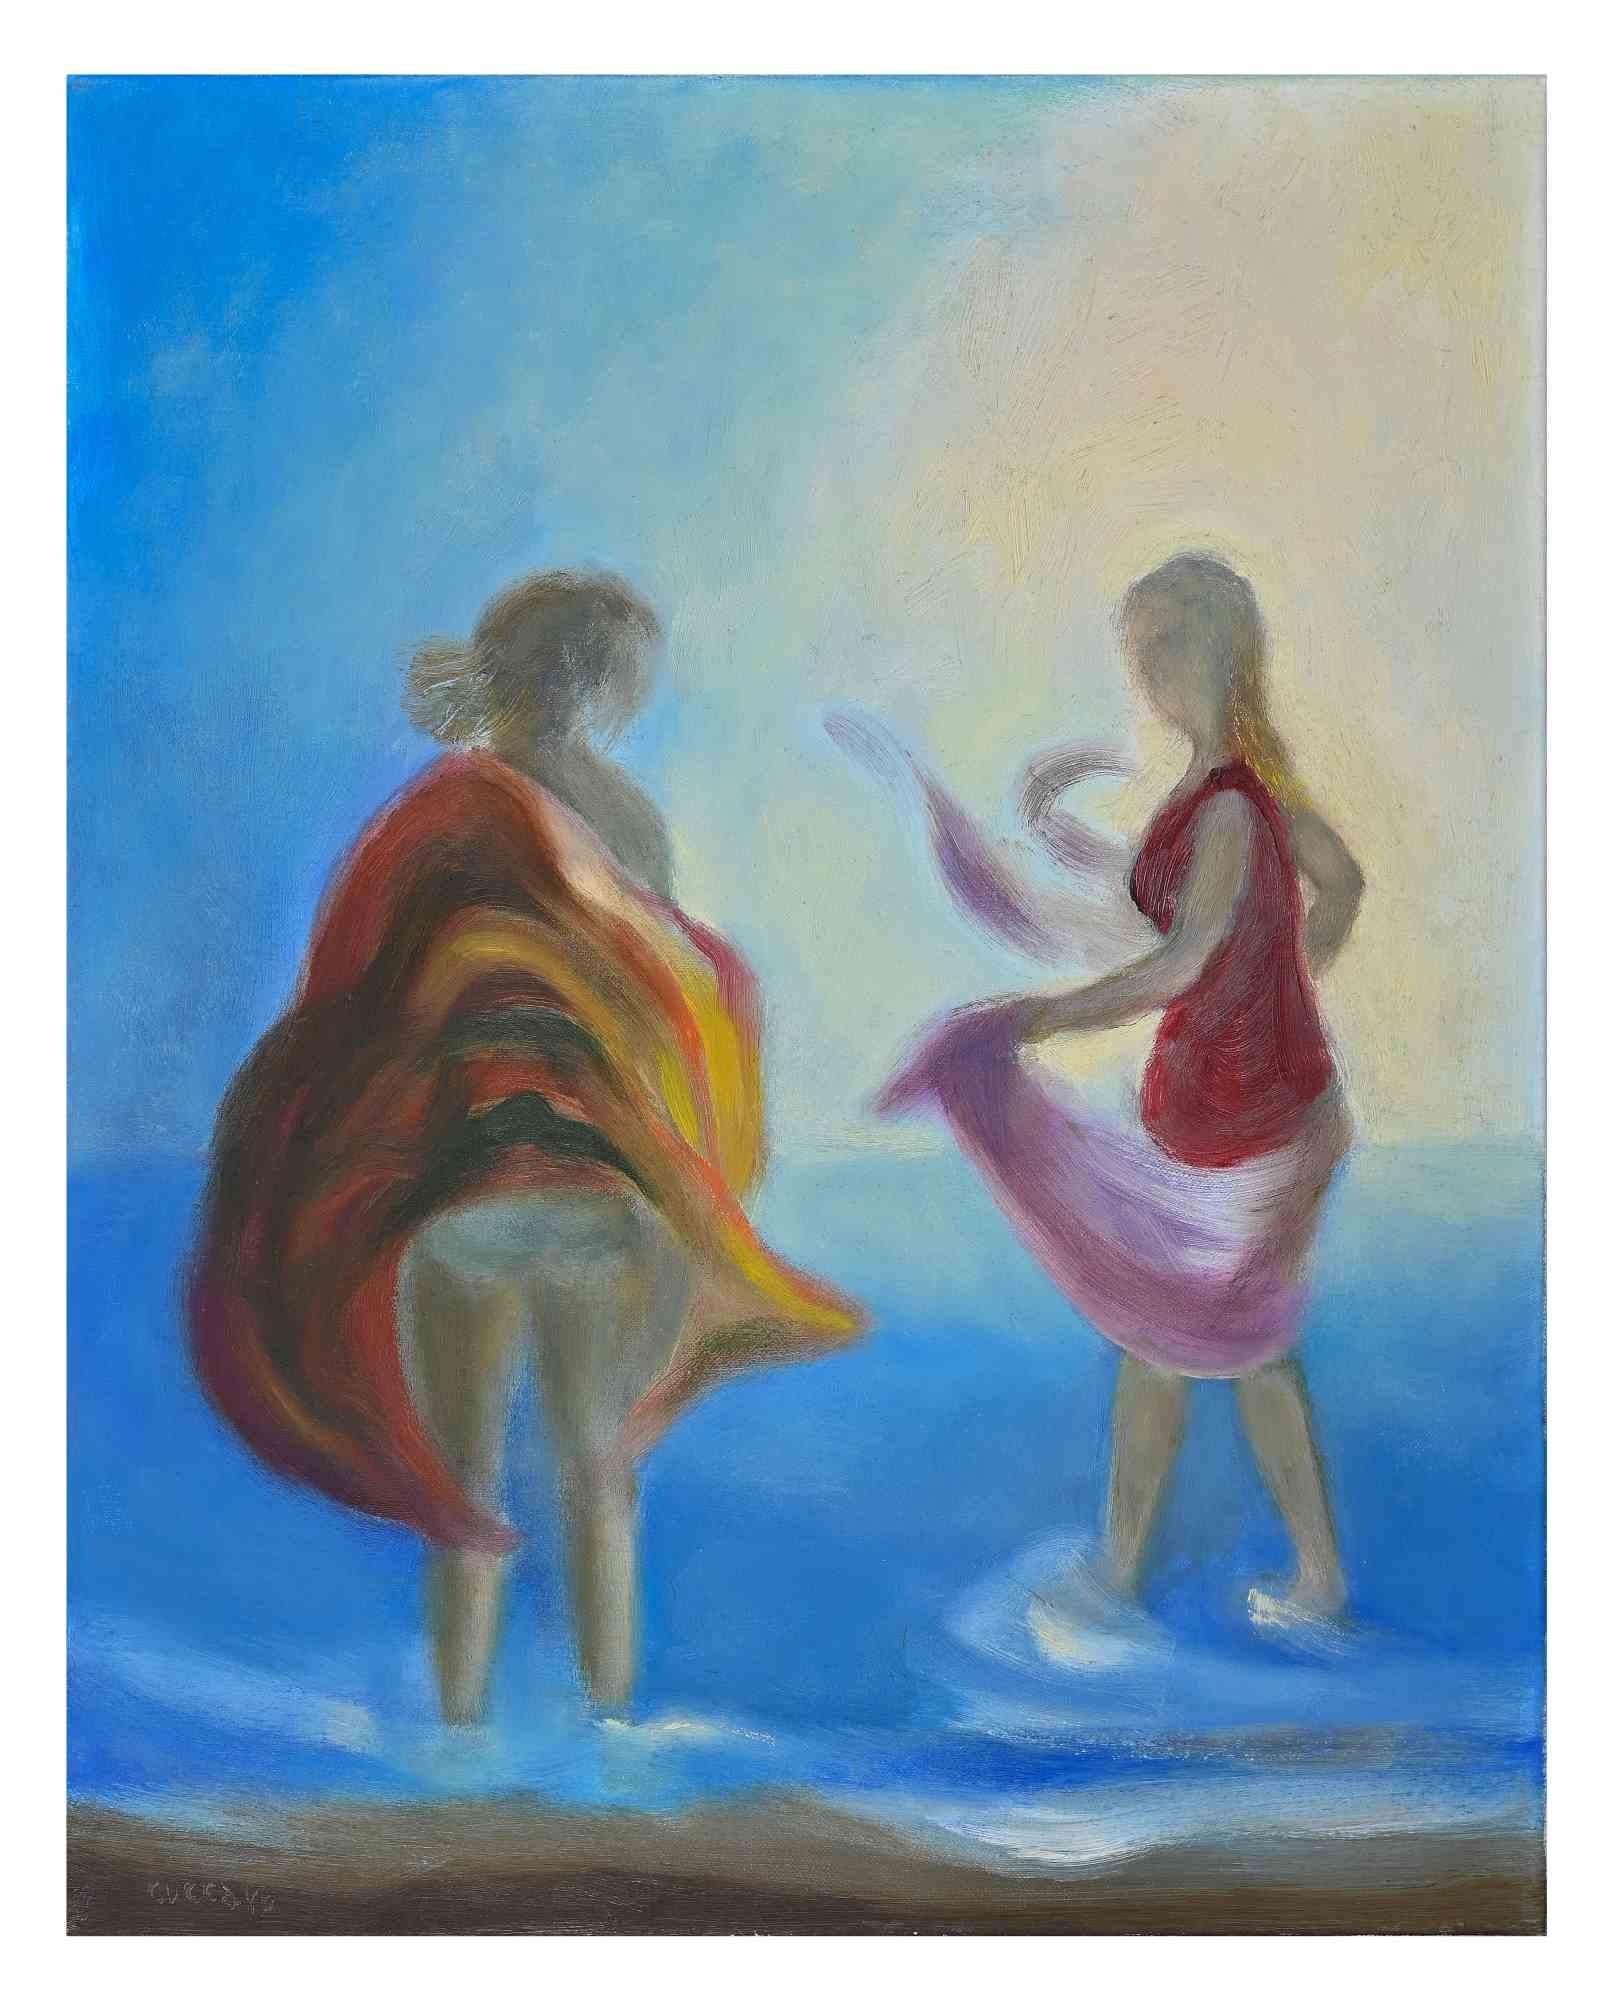 Women at the Shore is an original Contemporary Artwork realized in 2015 by Roberto Cuccaro. 

Original Oil Painting on Canvas.

Hand-signed on the lower left corner: Cuccaro.

Mint Conditions.

Women at the Shore is an original Contemporary Artwork